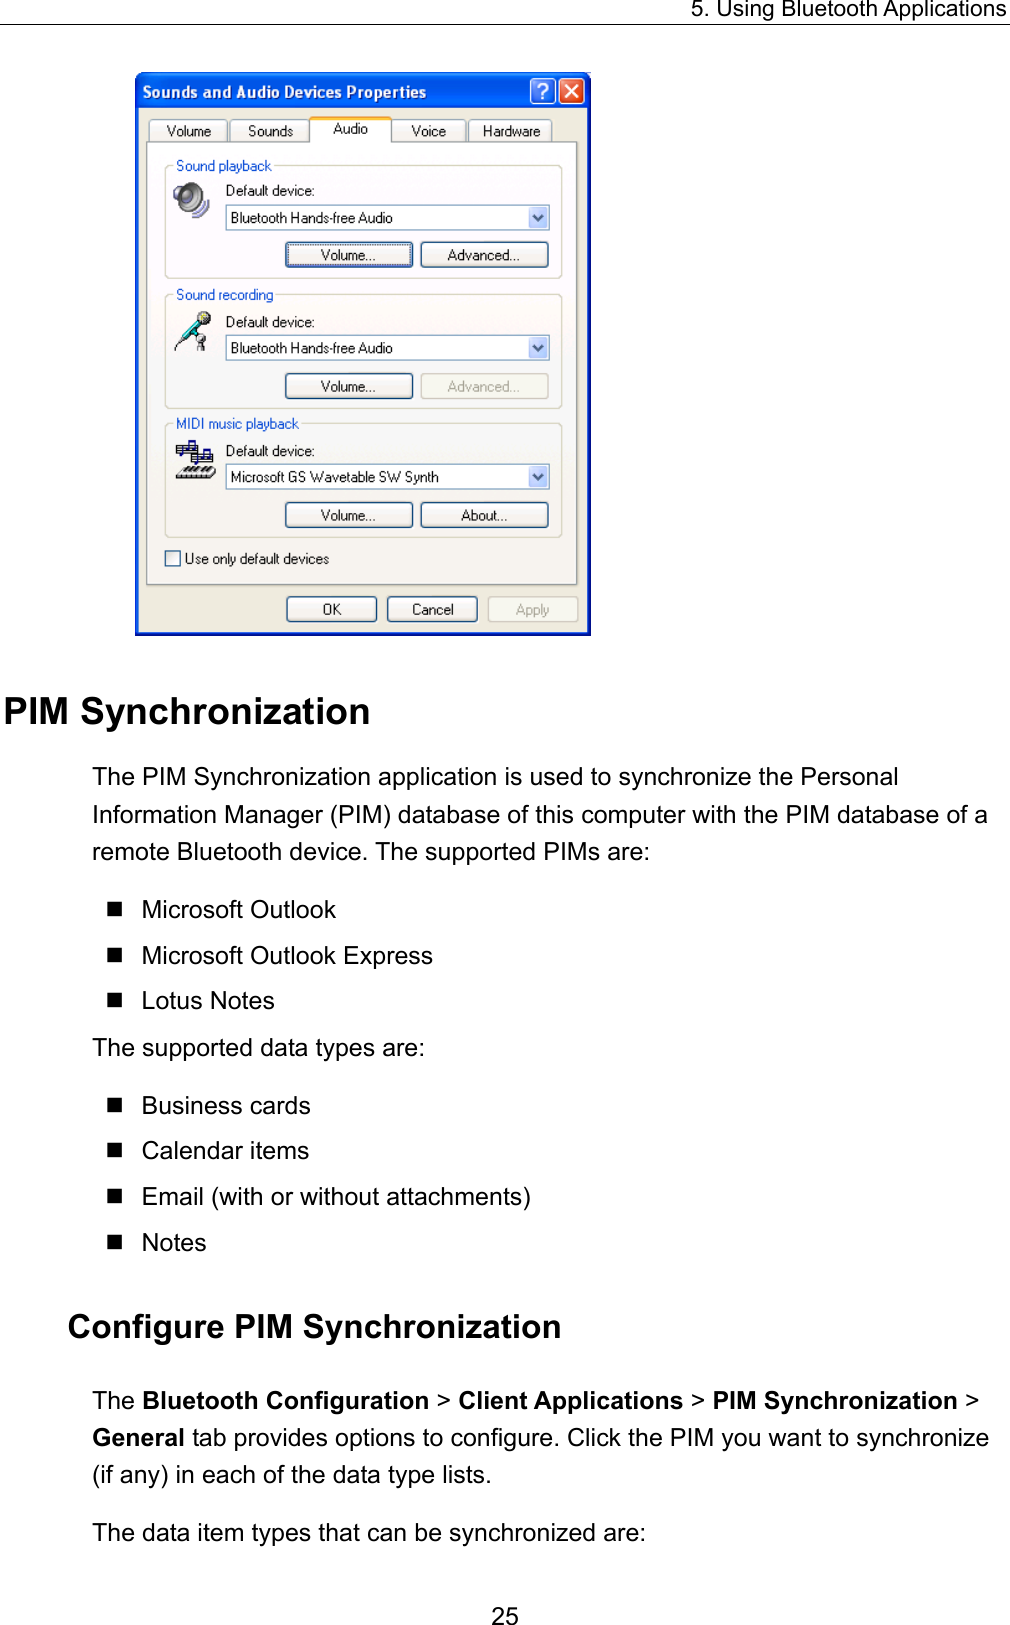 5. Using Bluetooth Applications 25  PIM Synchronization The PIM Synchronization application is used to synchronize the Personal Information Manager (PIM) database of this computer with the PIM database of a remote Bluetooth device. The supported PIMs are:  Microsoft Outlook  Microsoft Outlook Express  Lotus Notes The supported data types are:  Business cards  Calendar items  Email (with or without attachments)  Notes Configure PIM Synchronization The Bluetooth Configuration &gt; Client Applications &gt; PIM Synchronization &gt; General tab provides options to configure. Click the PIM you want to synchronize (if any) in each of the data type lists. The data item types that can be synchronized are: 